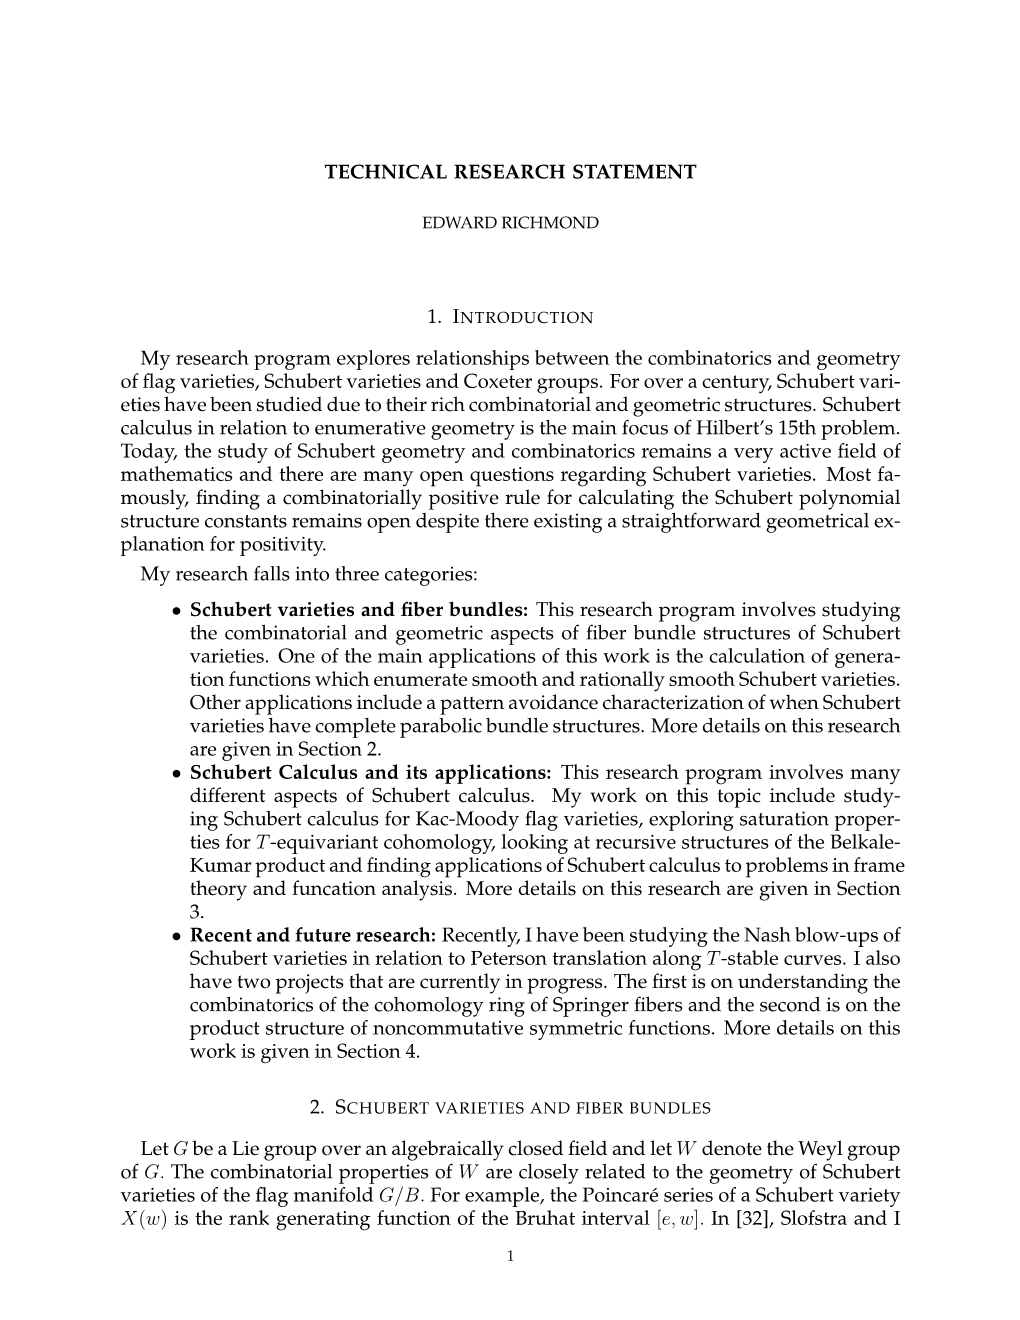 TECHNICAL RESEARCH STATEMENT My Research Program